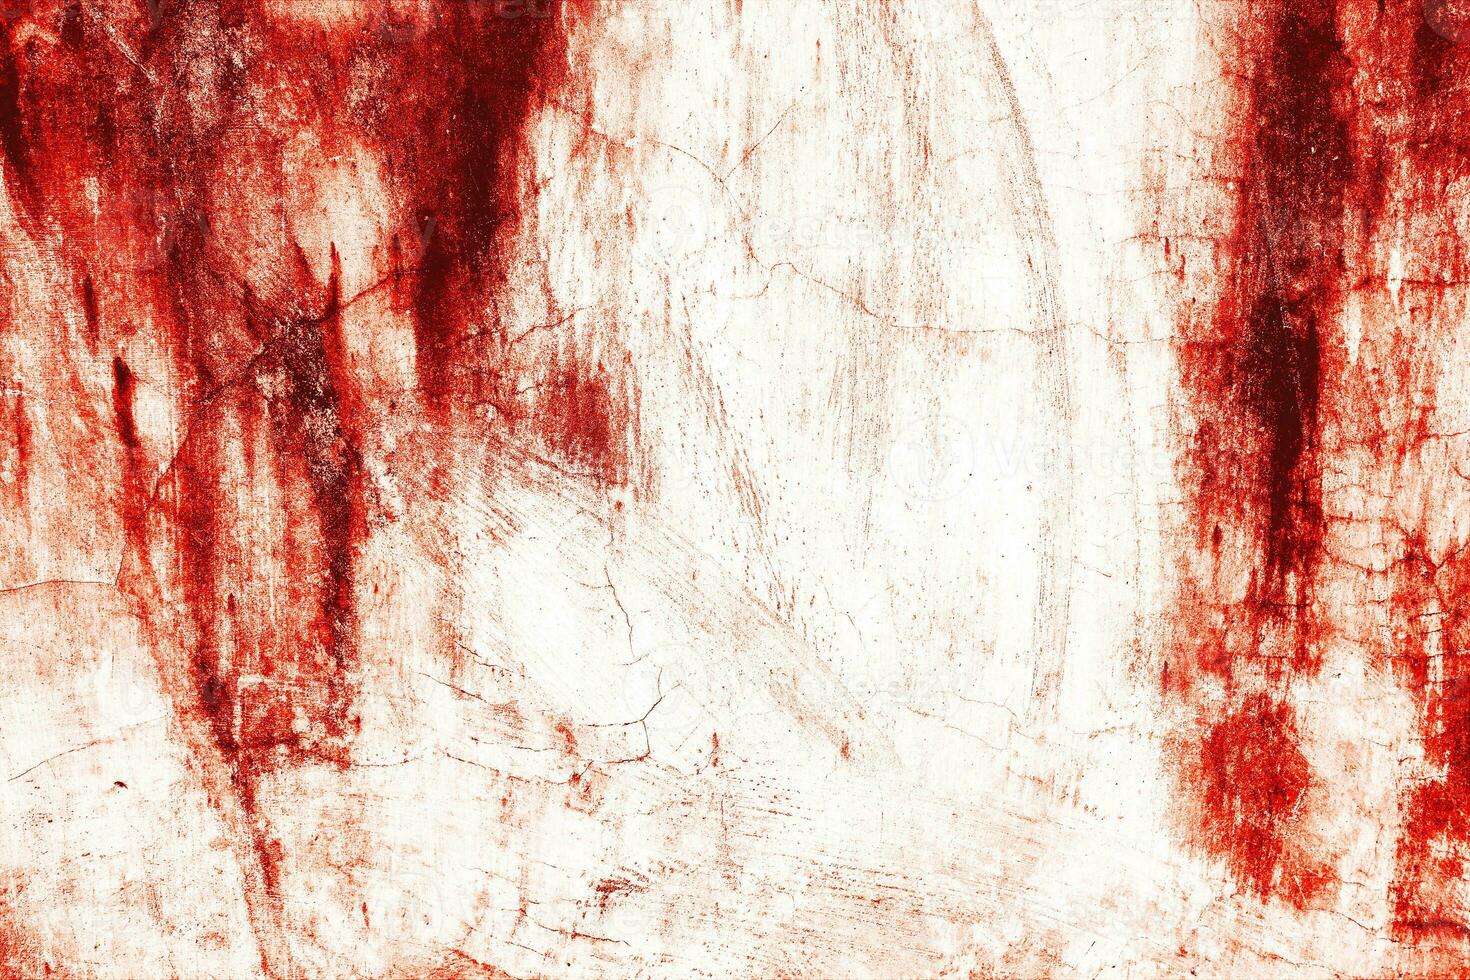 Dark red blood on old wall for halloween concept photo